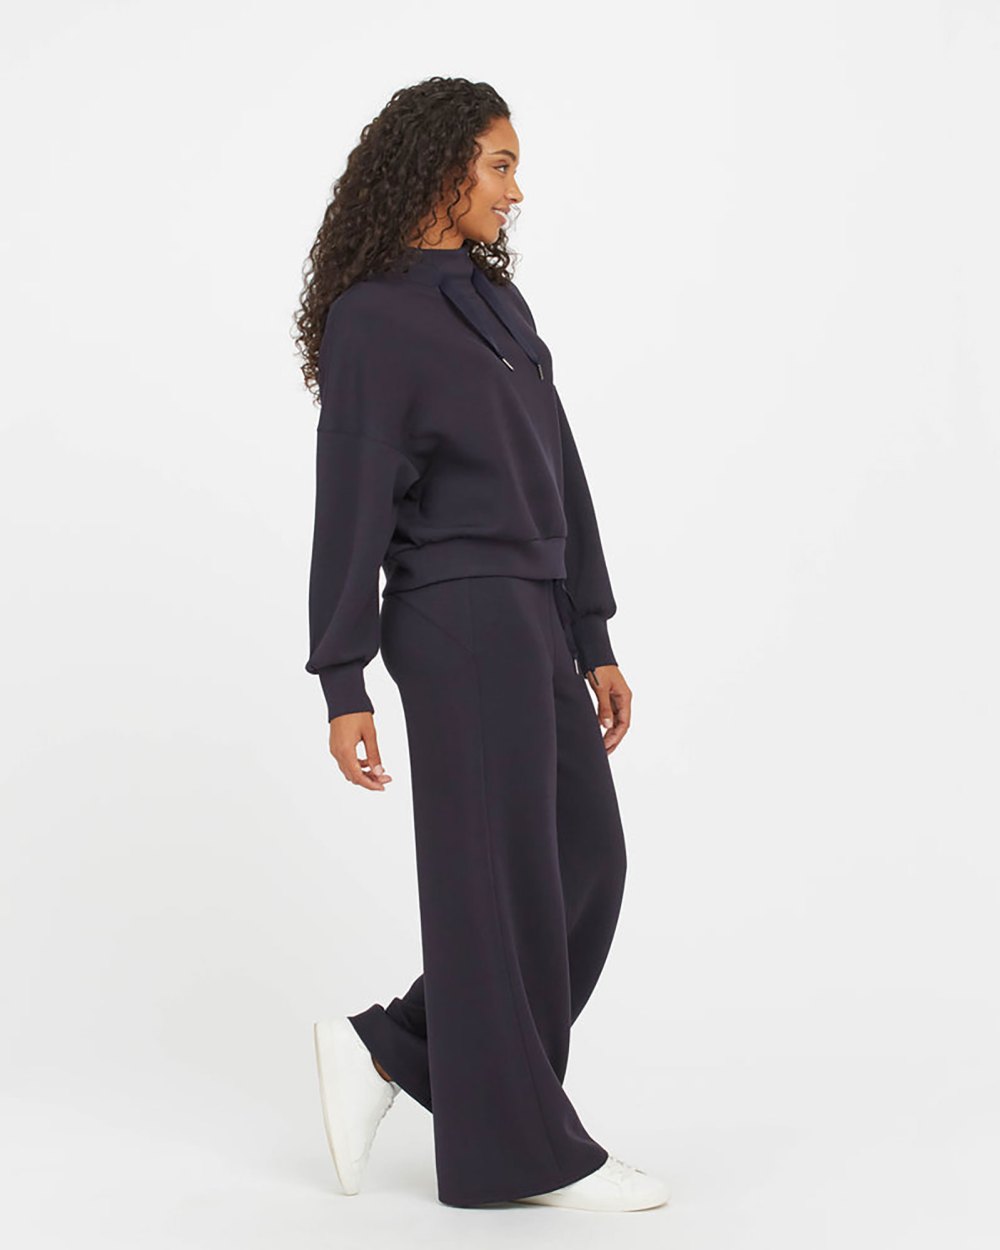 Spanx's AirEssentials Wide-Leg Pants Editor's Review